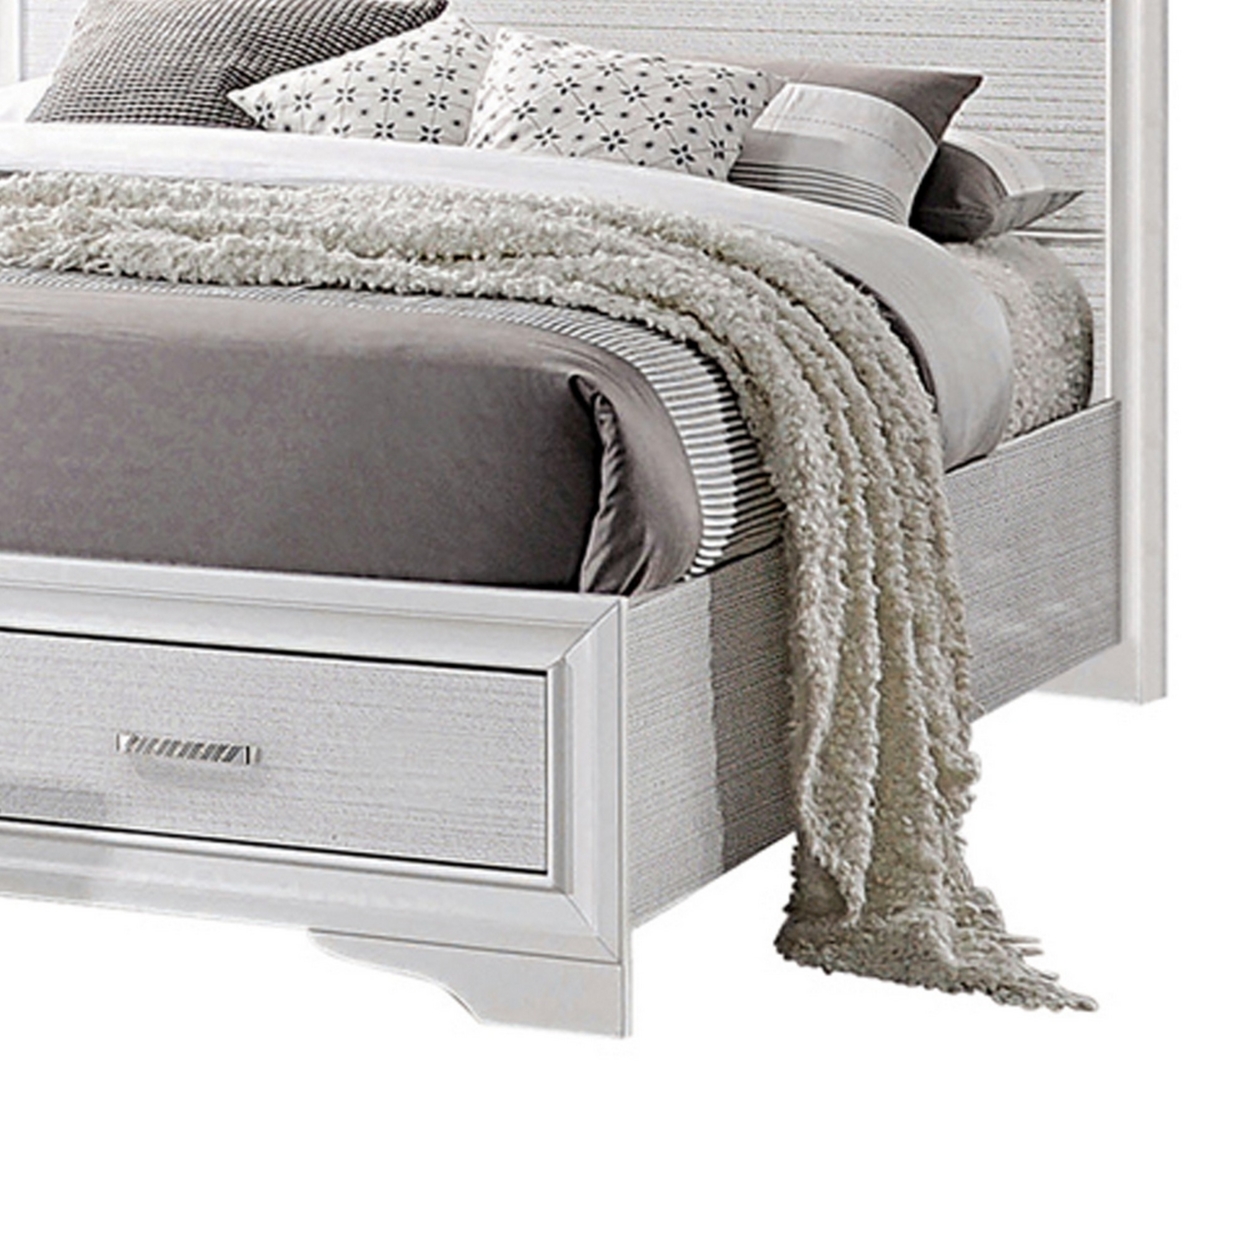 Contemporary Eastern King Bed With Drawers And Glittering Stripes, White- Saltoro Sherpi